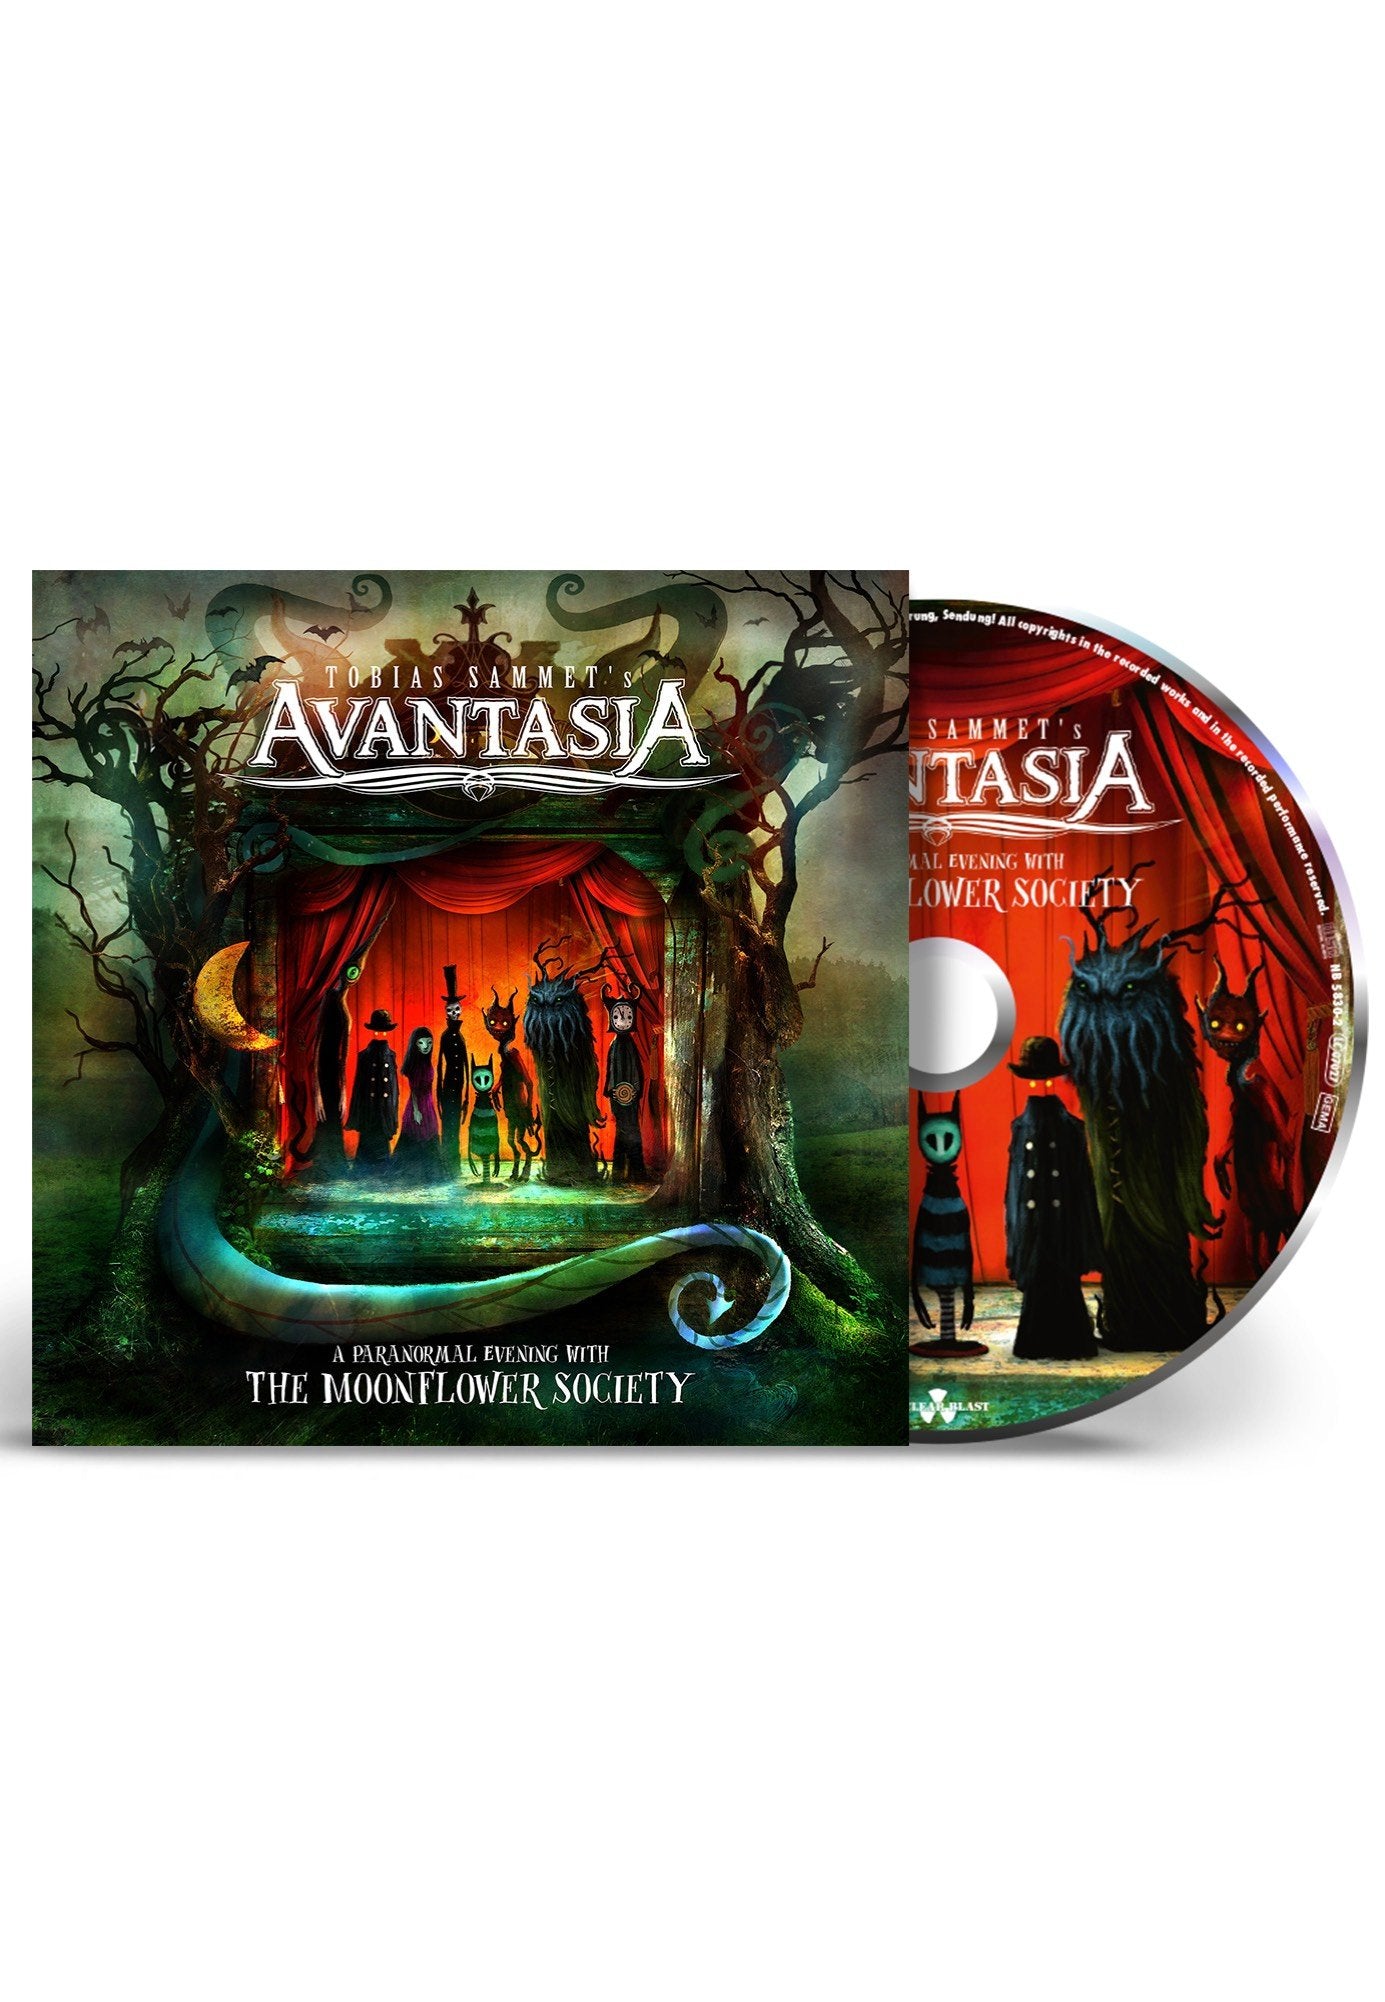 Avantasia - A Paranormal Evening with the Moonflower Society - CD